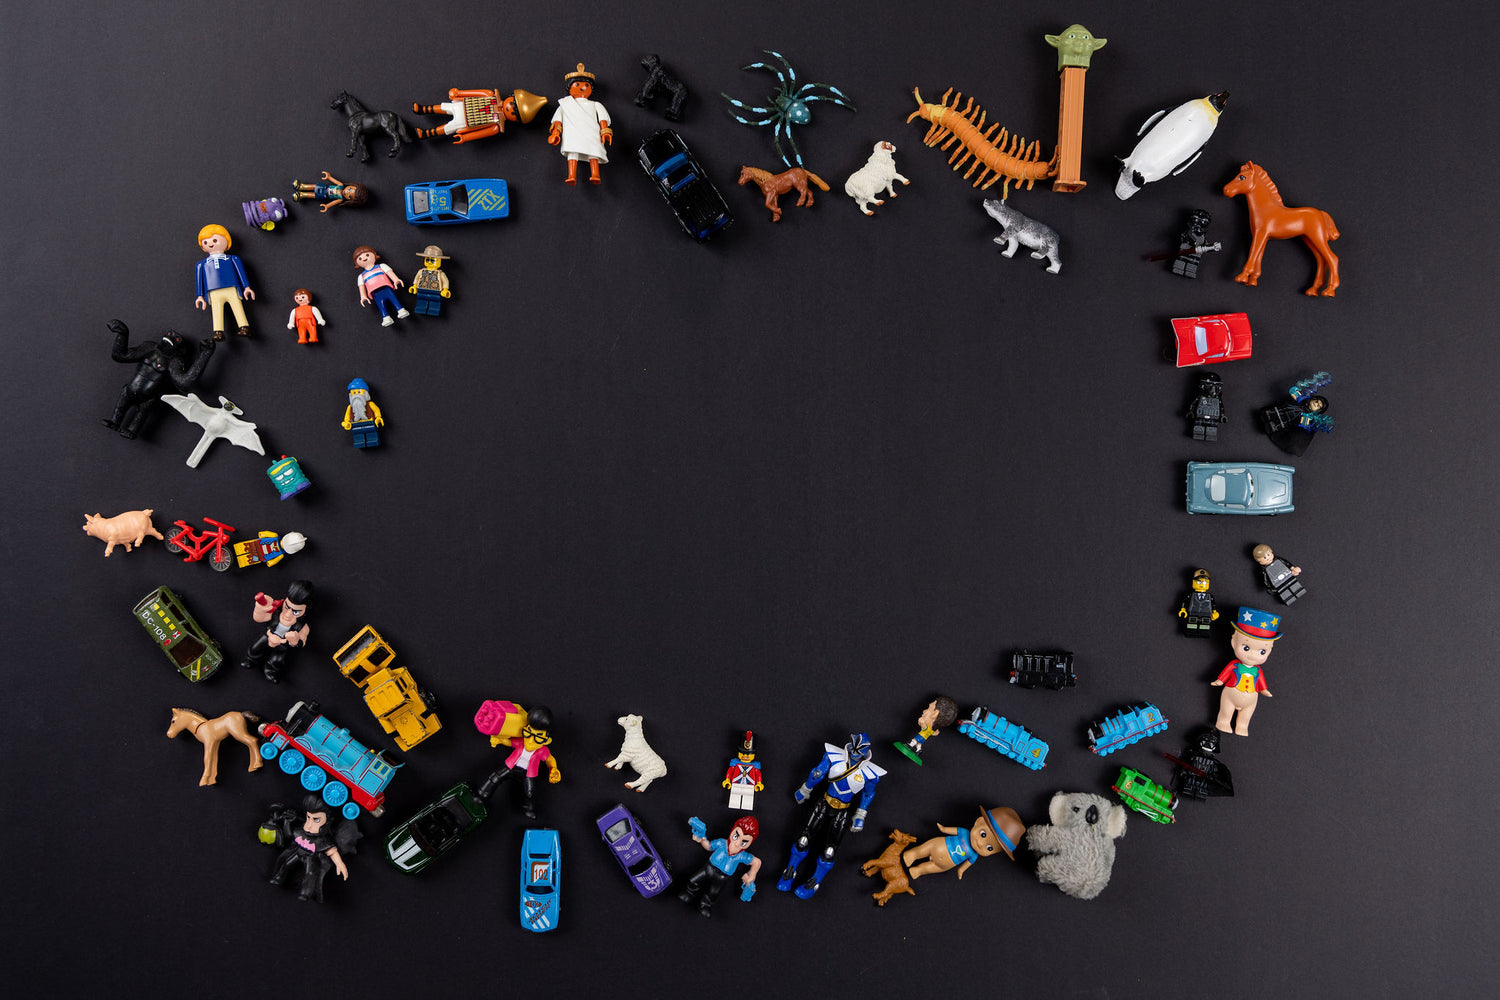 Small toys are scattered in a circle shape with black background